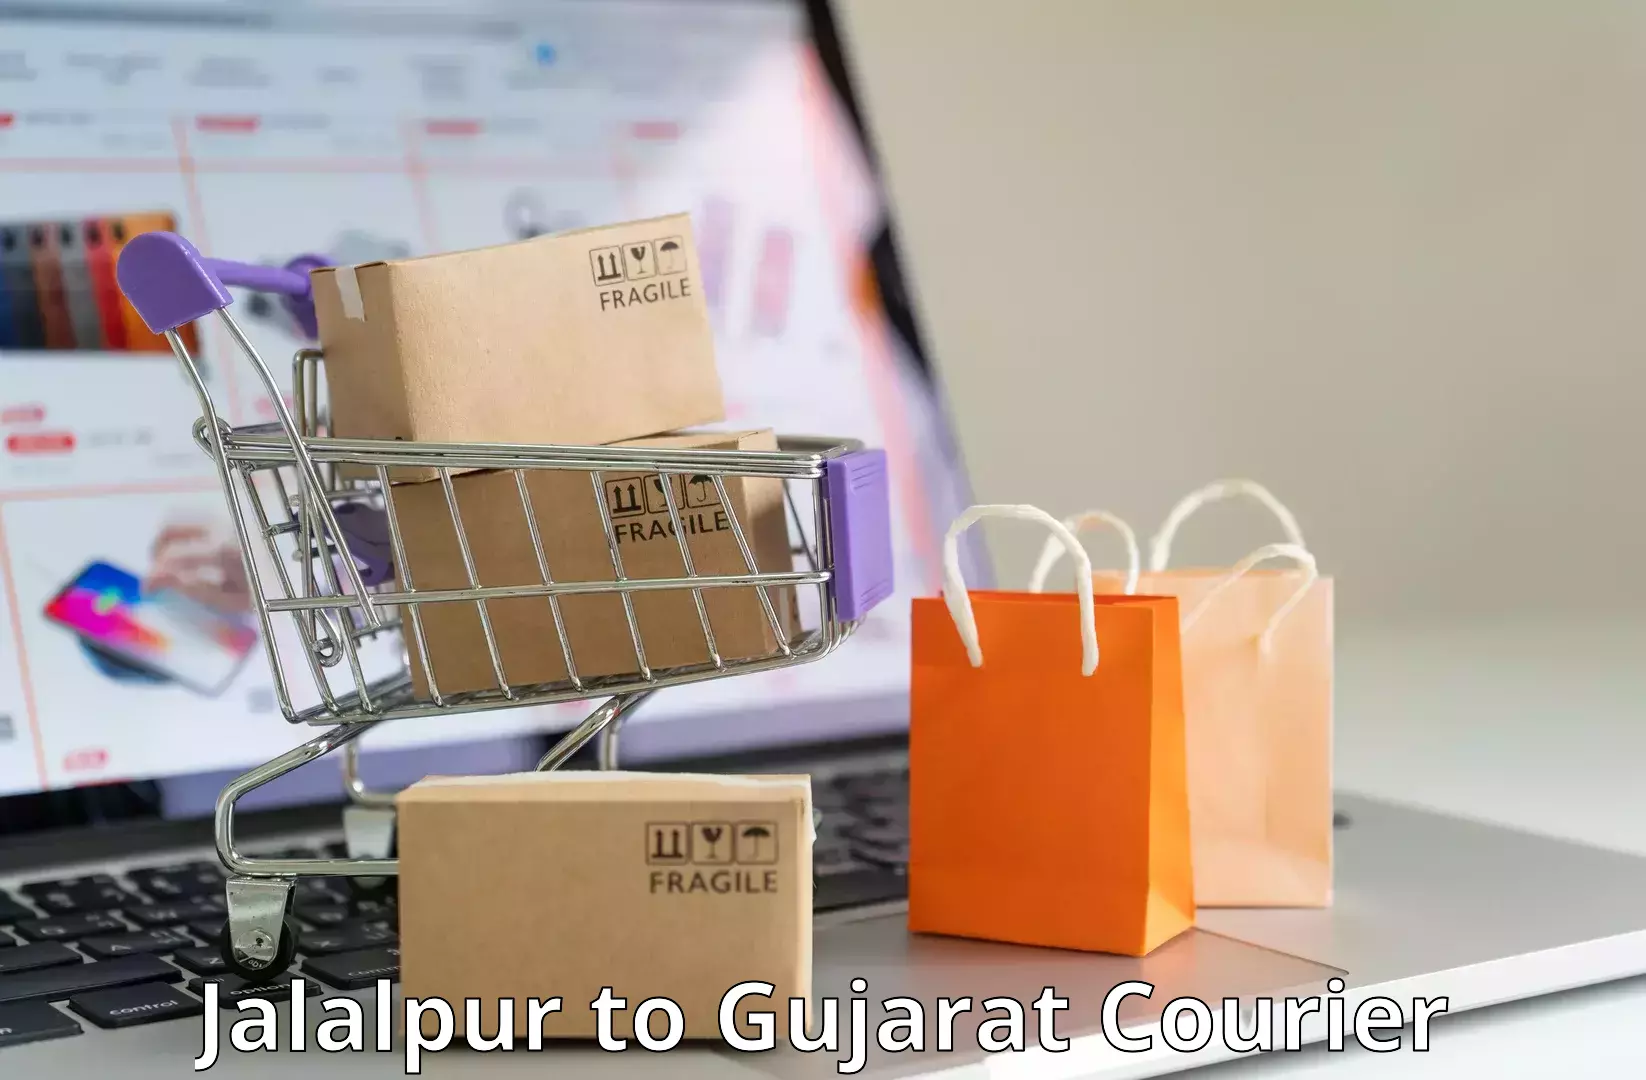 Lightweight parcel options Jalalpur to Anand